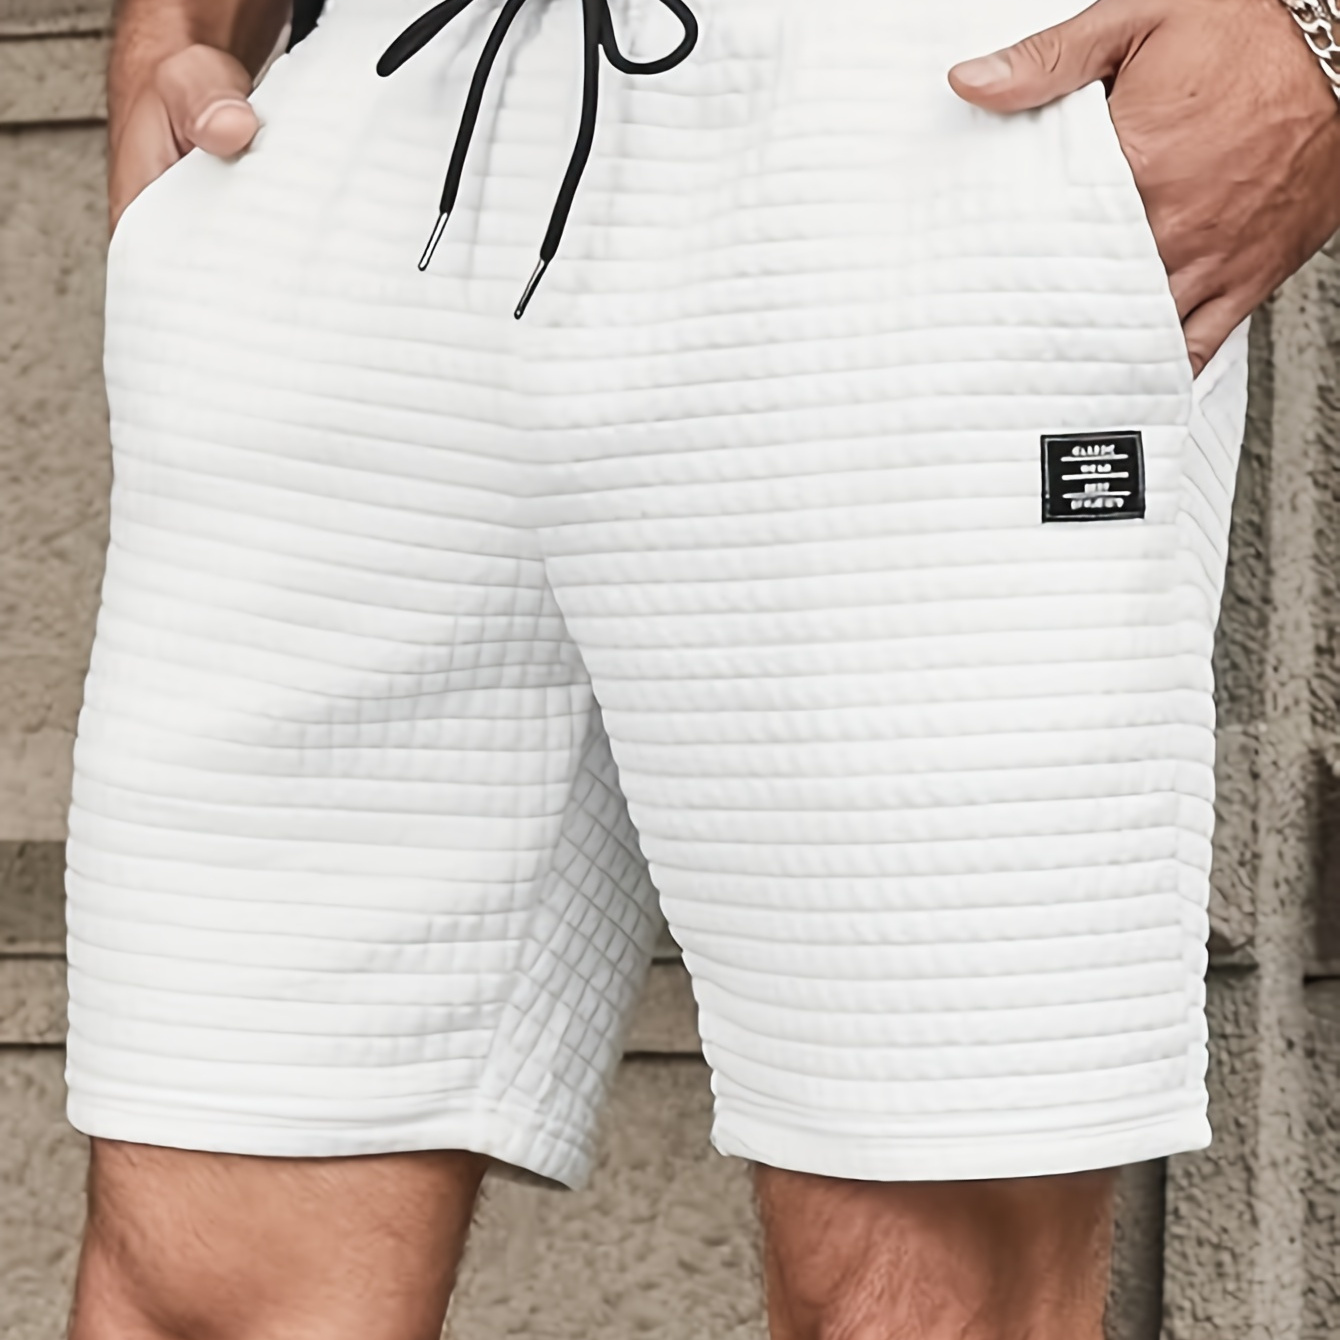 

Men's Waffle Knit Shorts With Drawstring, Pockets And Label Patchwork, Casual And Chic Shorts For Summer Leisurewear